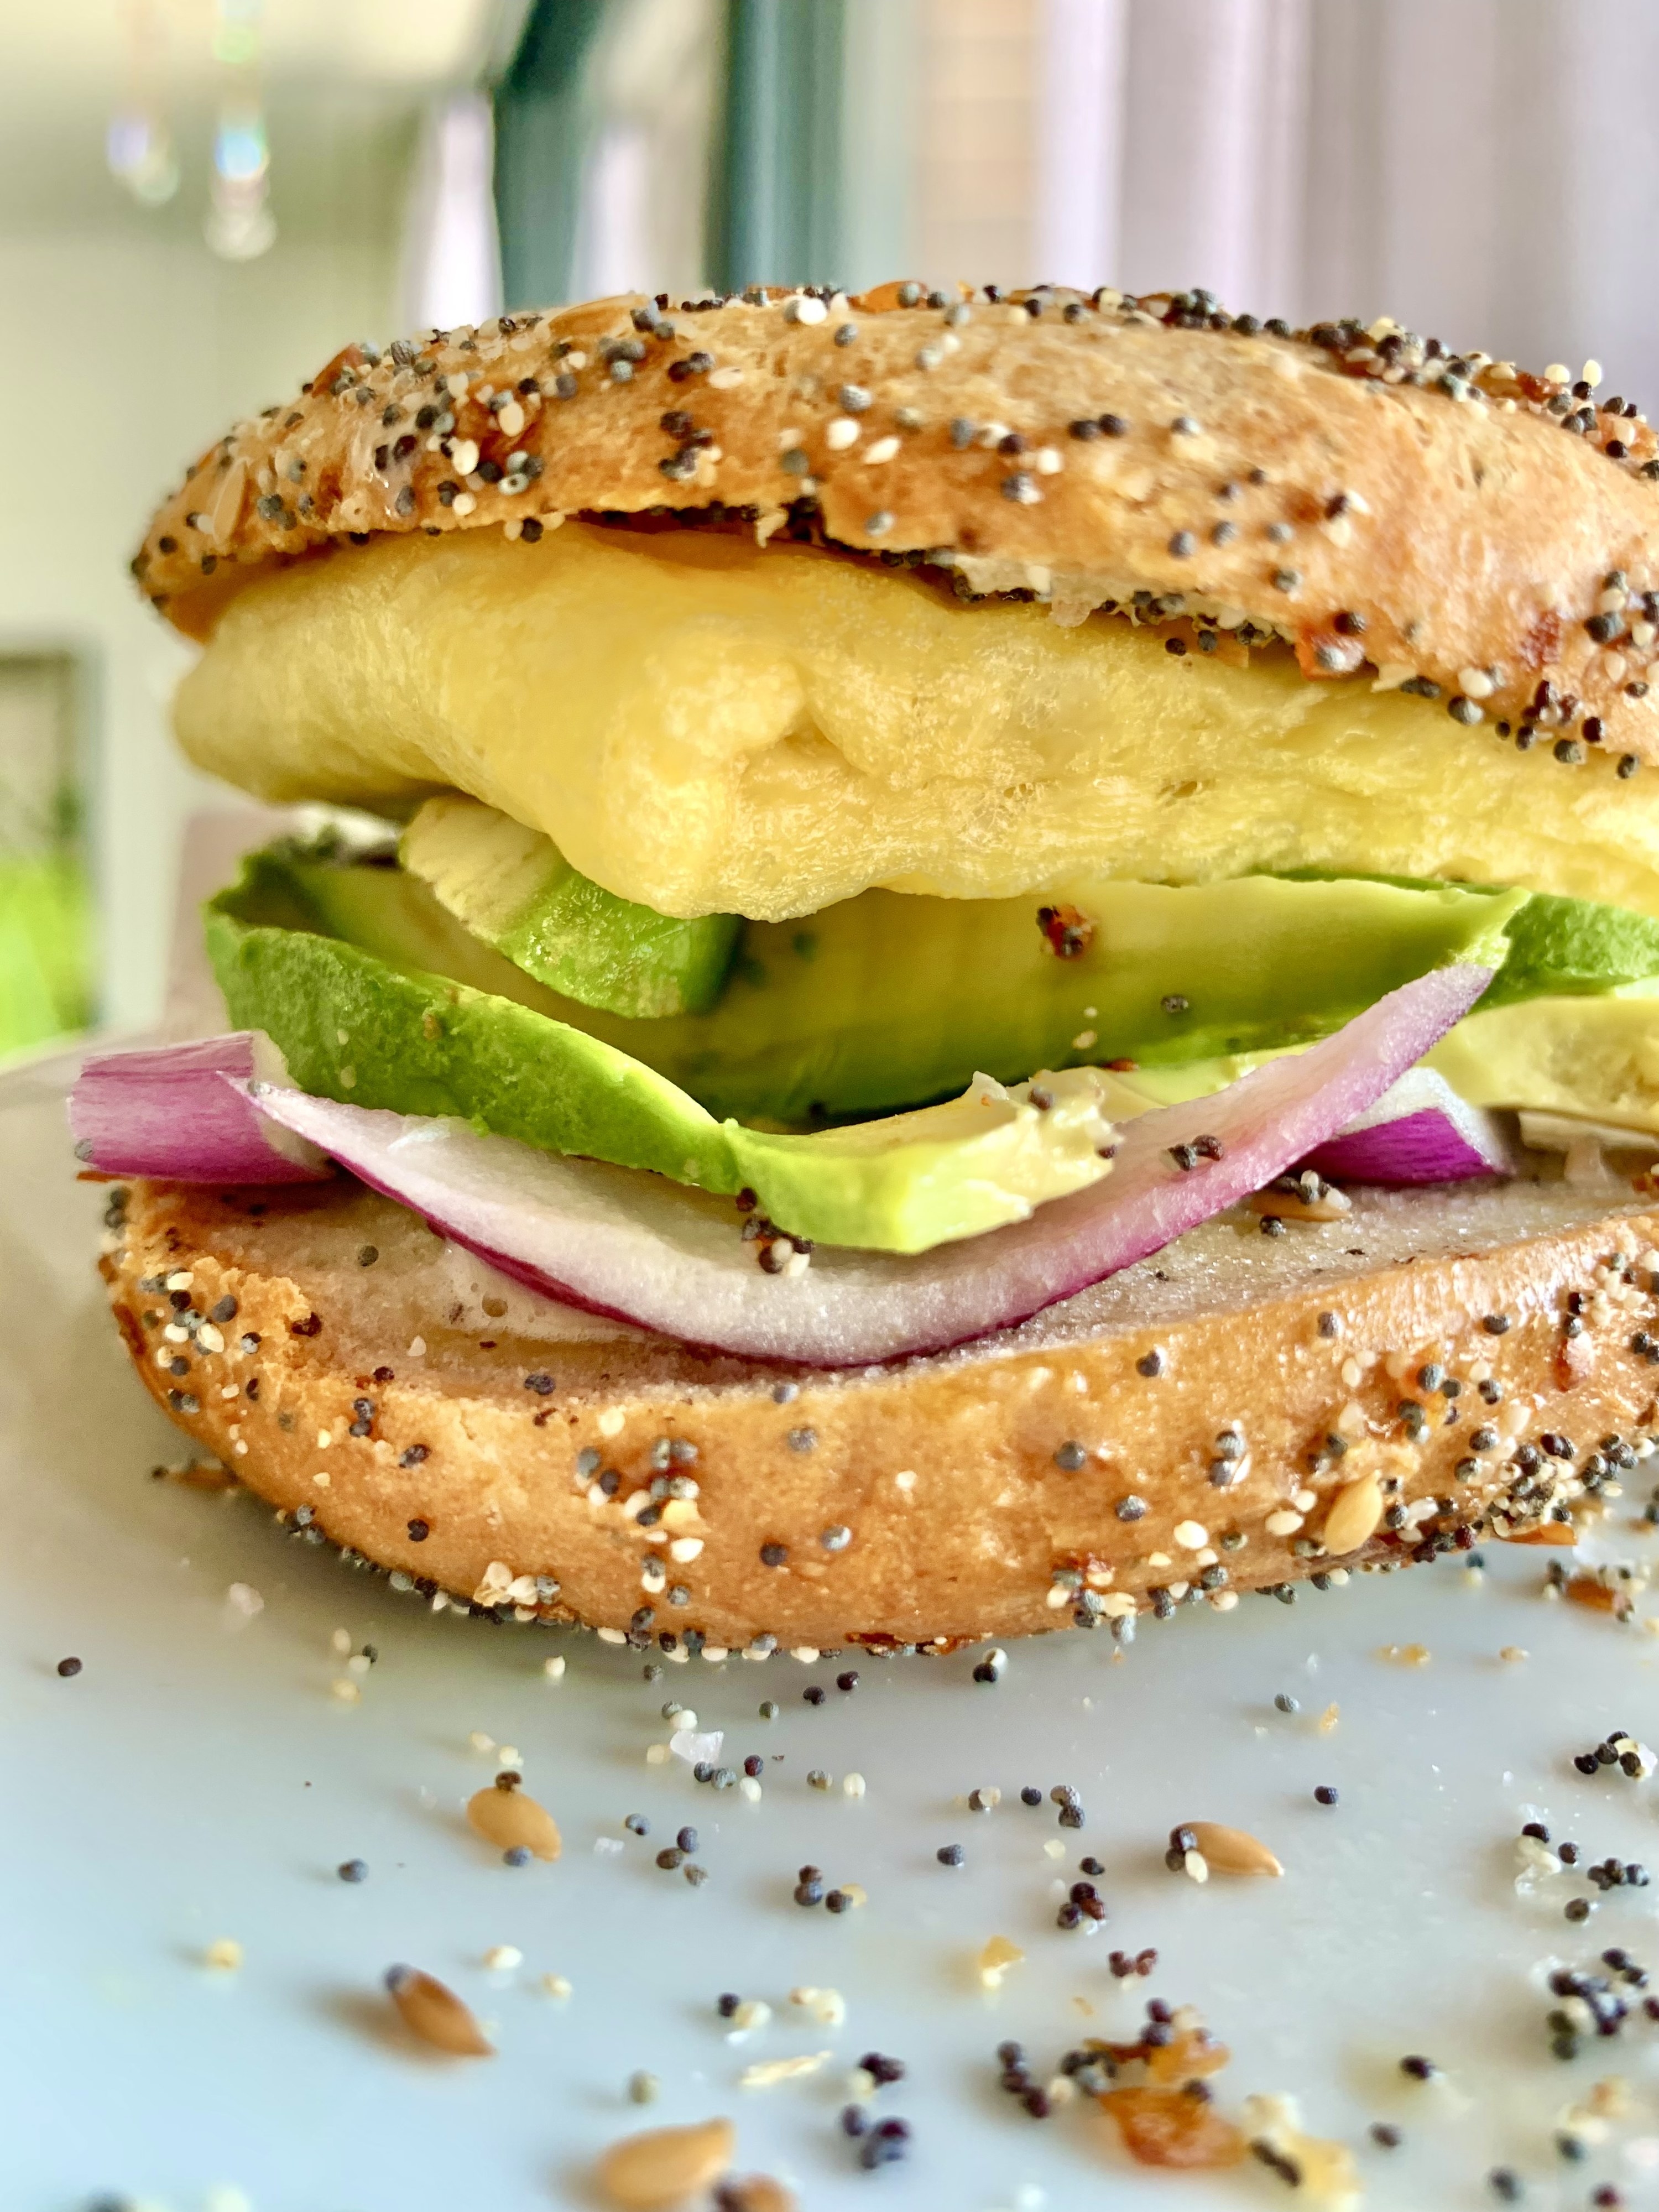 An everything bread sandwich with Just Egg, red onion, and avocado